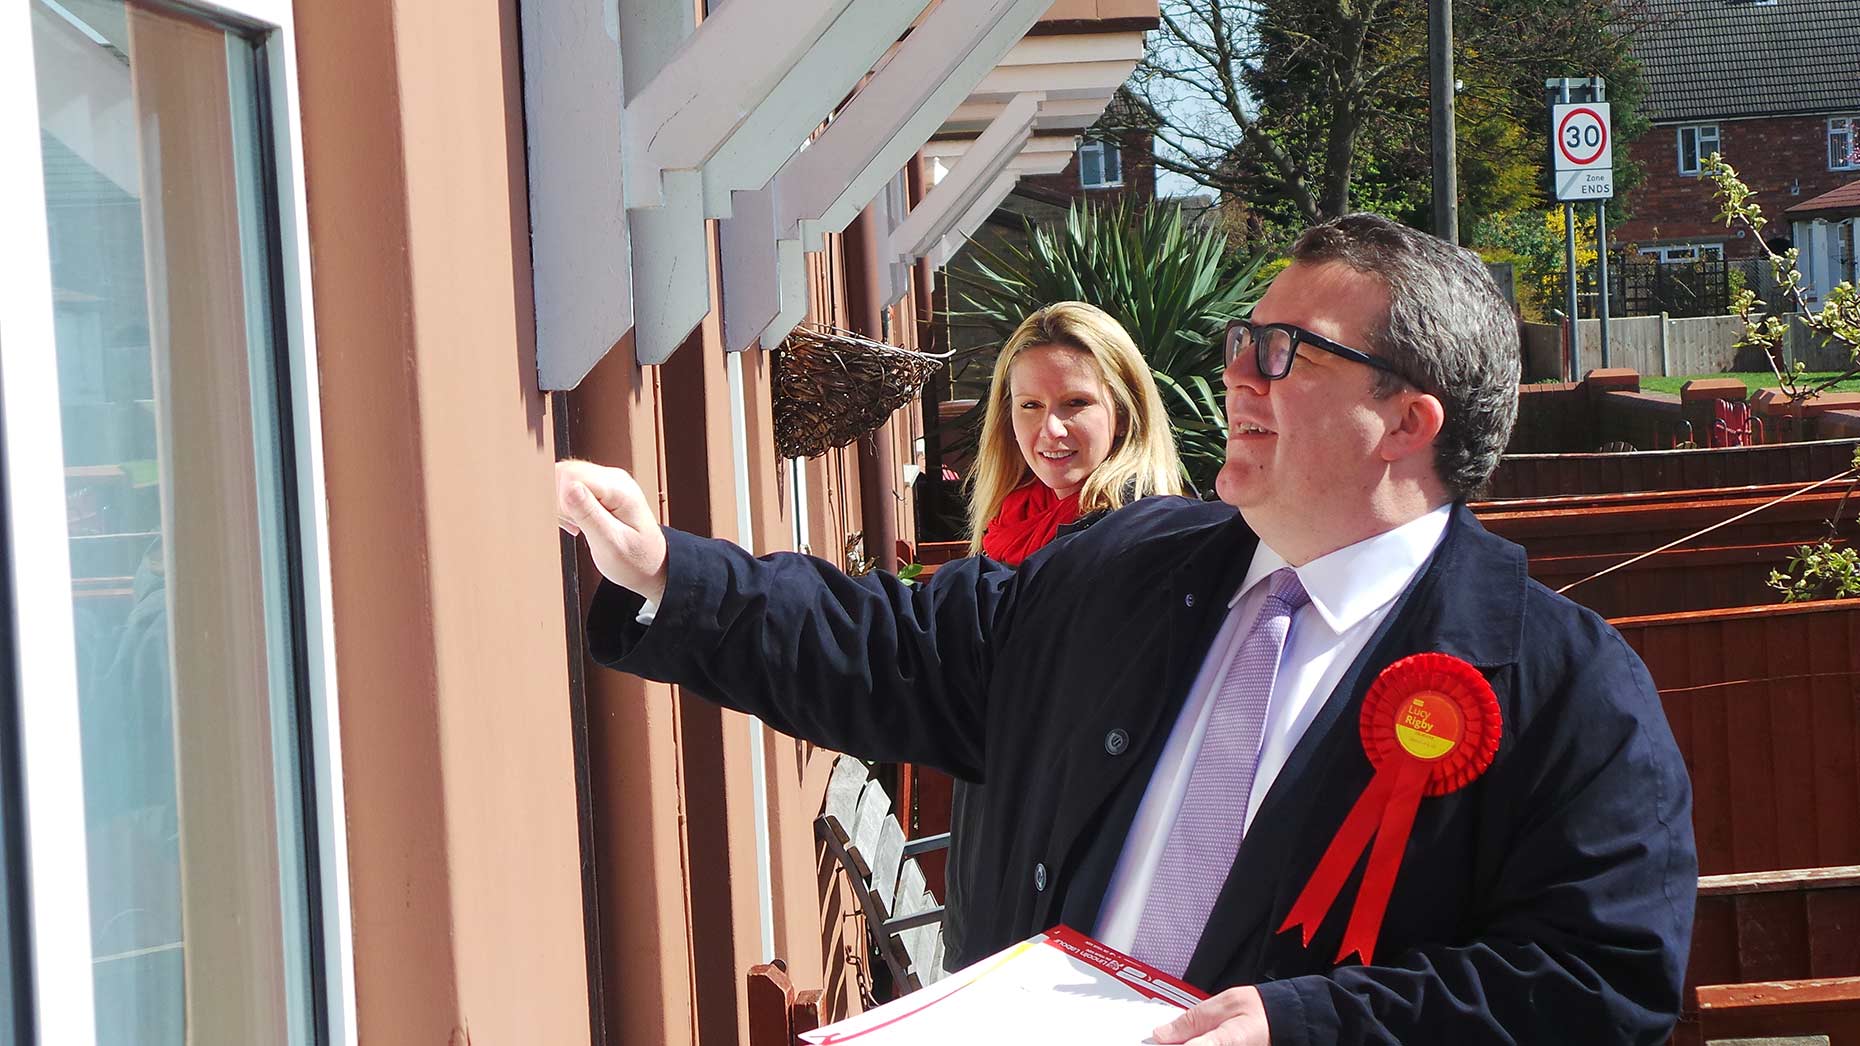 Tom Watson and Lucy Rigby door knocking in the Glebe area of the city on April 13, 2015